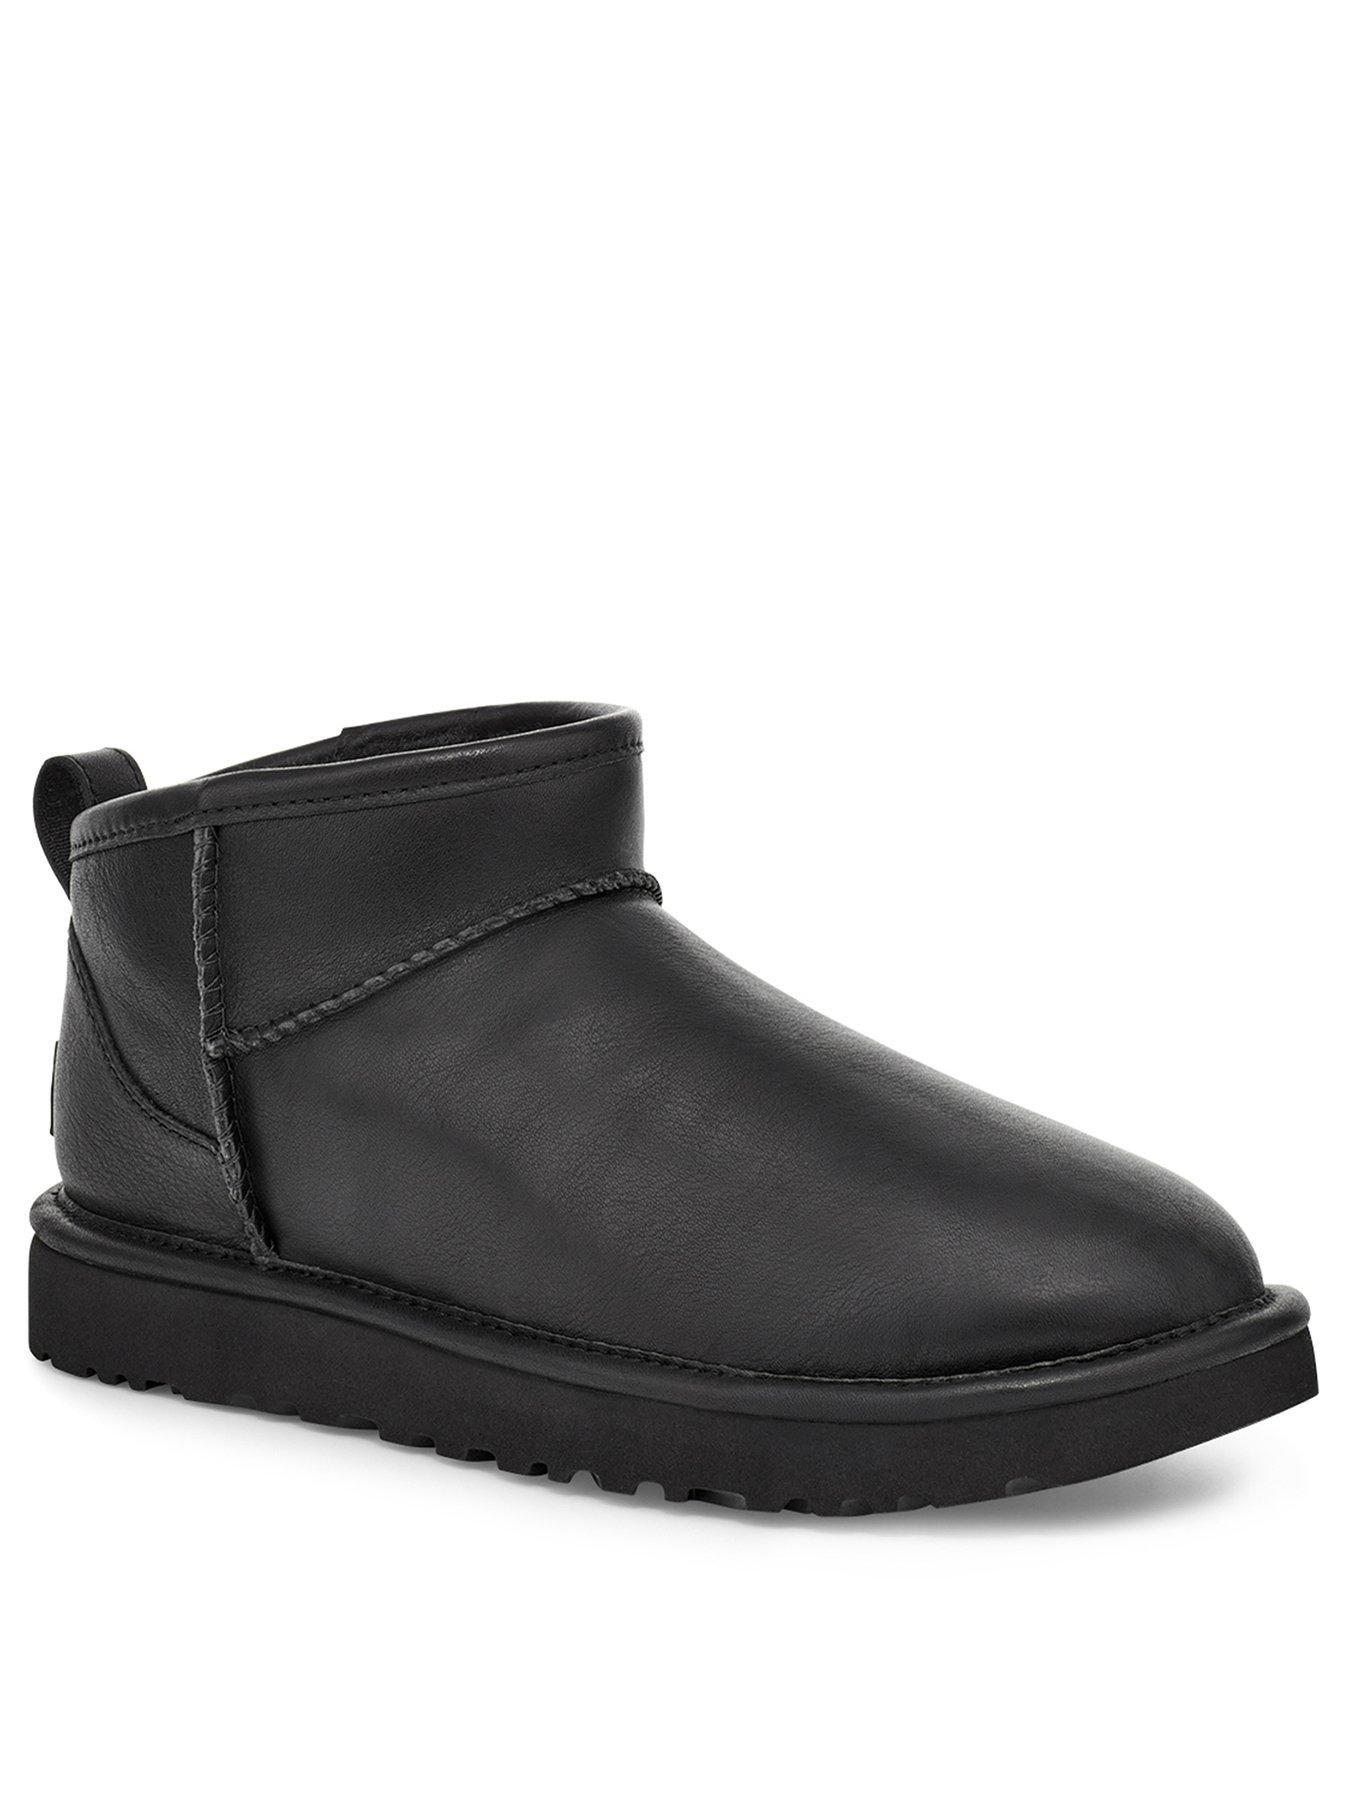 ugg leather ankle boots uk